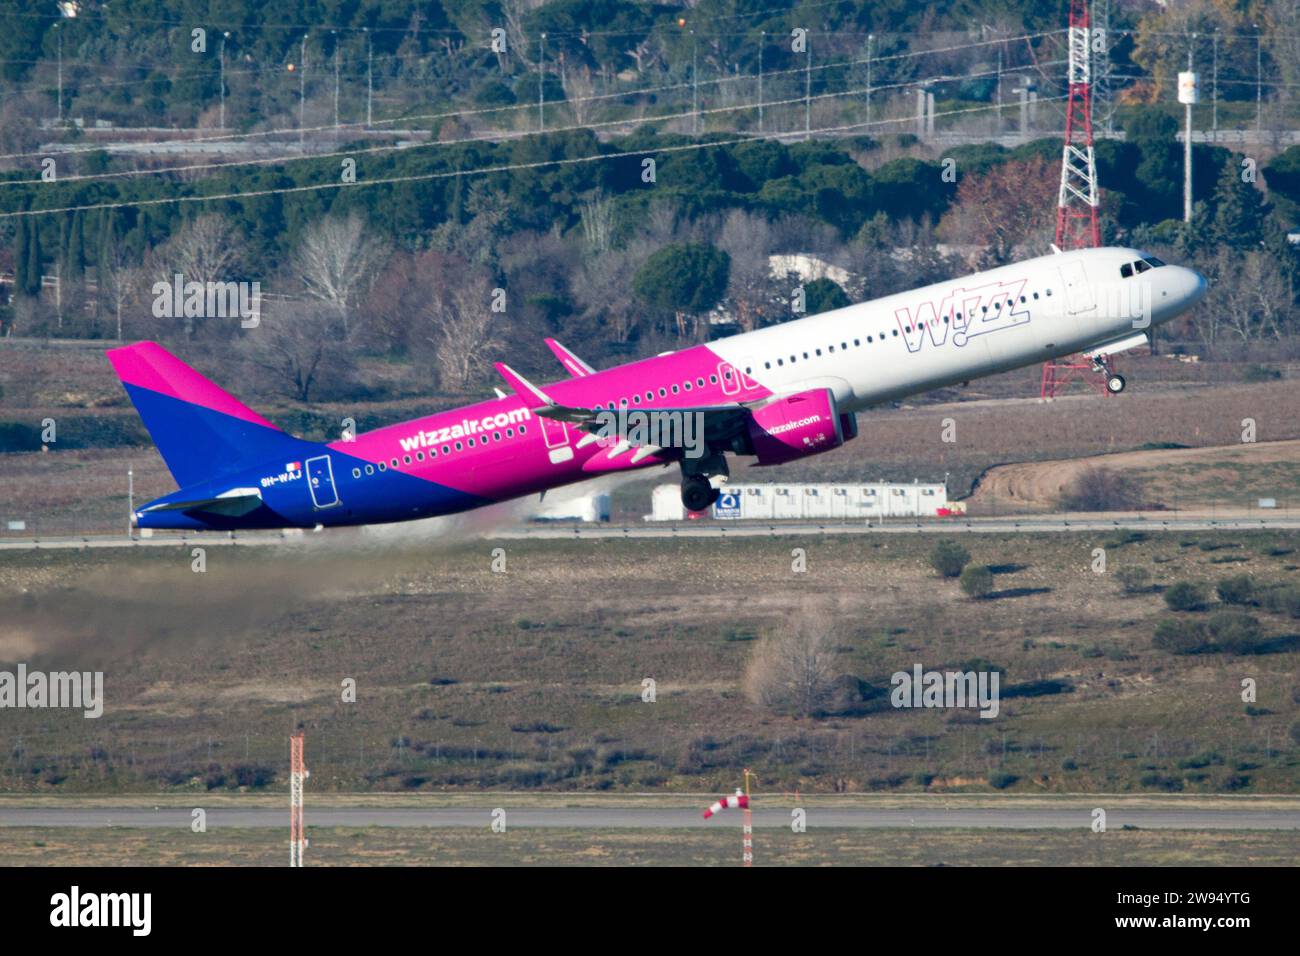 Airbus A321 airliner of the airline Wizz Air taking off Stock Photo